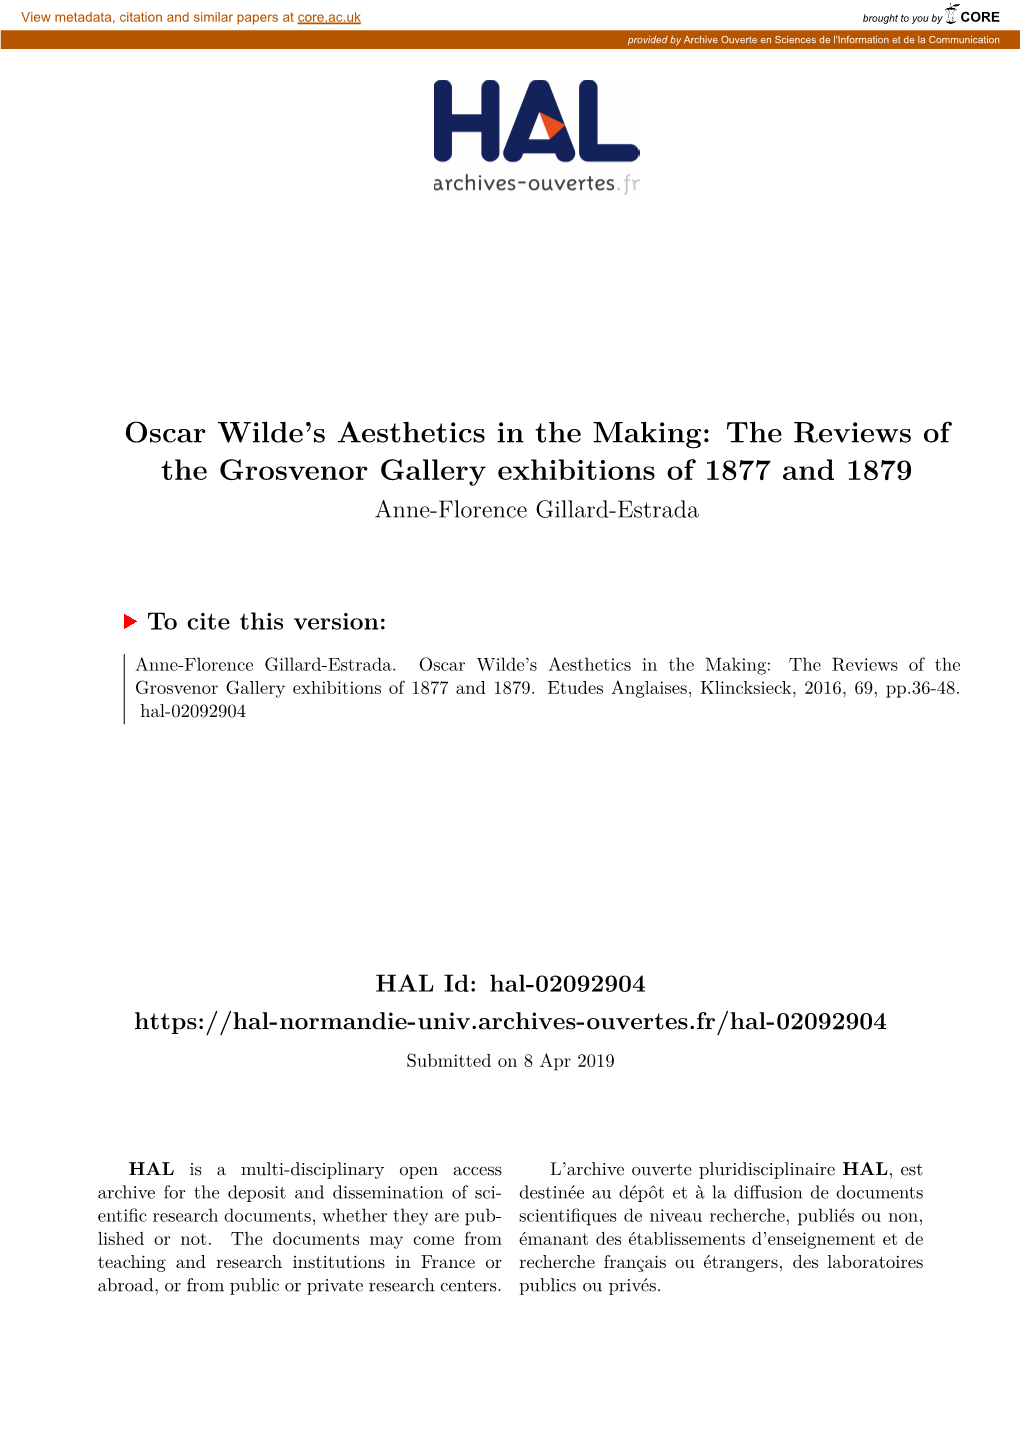 Oscar Wilde's Aesthetics in the Making: the Reviews of The